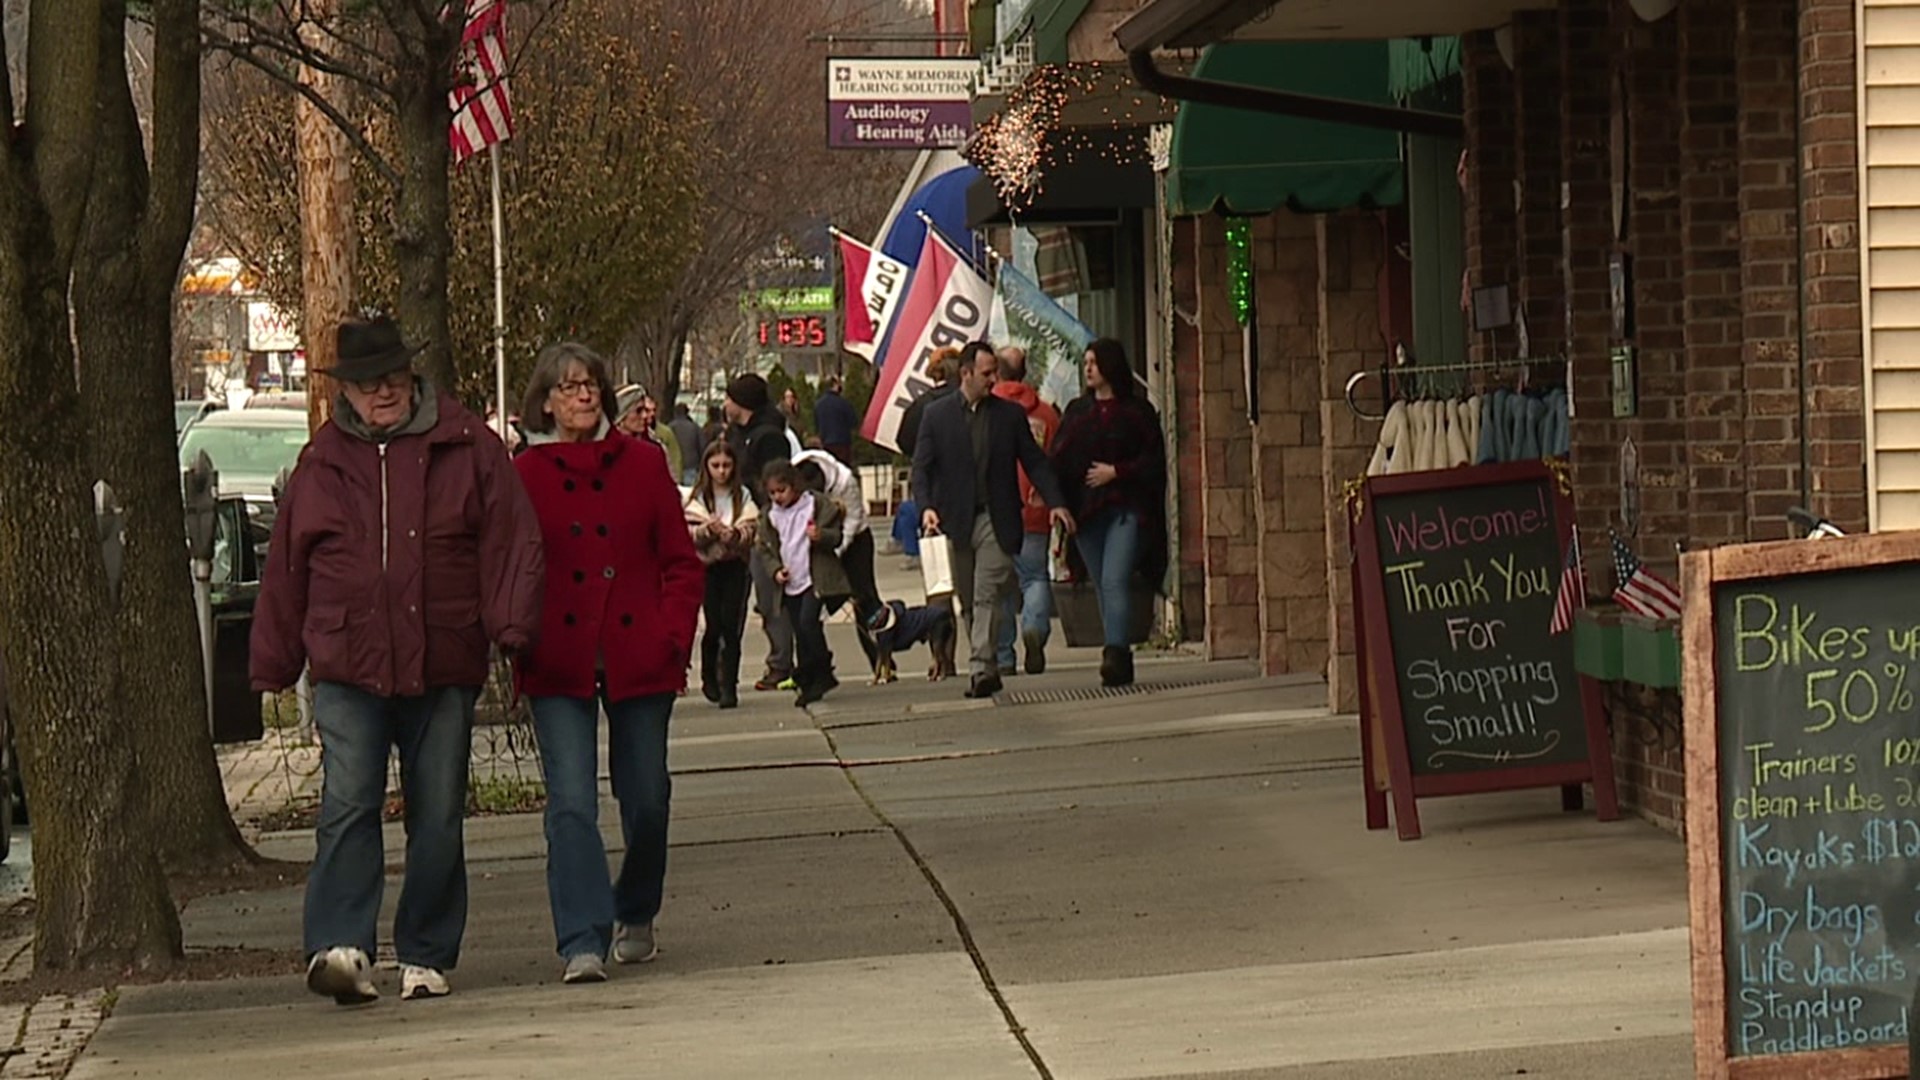 Shops in Honesdale are excited as they prepare for some larger crowds this Saturday.